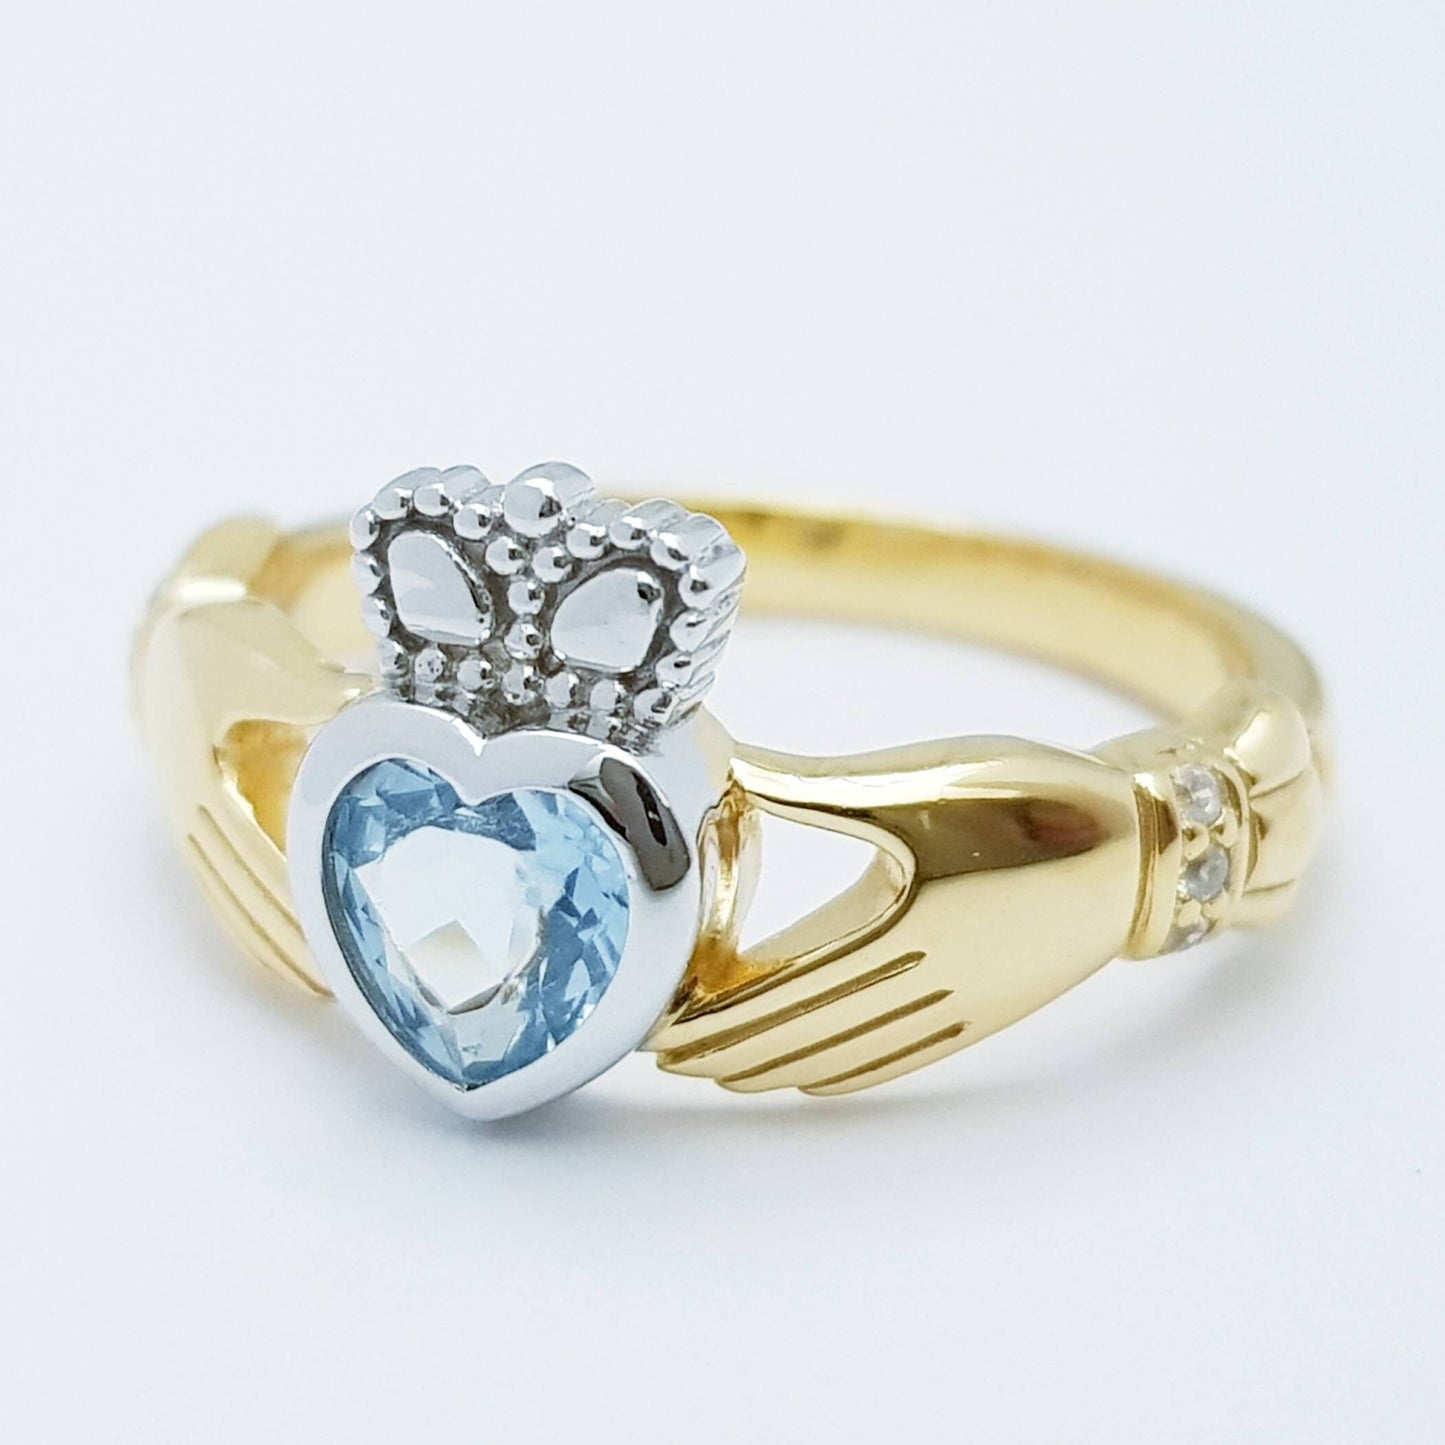 Sterling Silver Gold plated Claddagh ring set with light blue aquamarine stone, irish claddagh rings